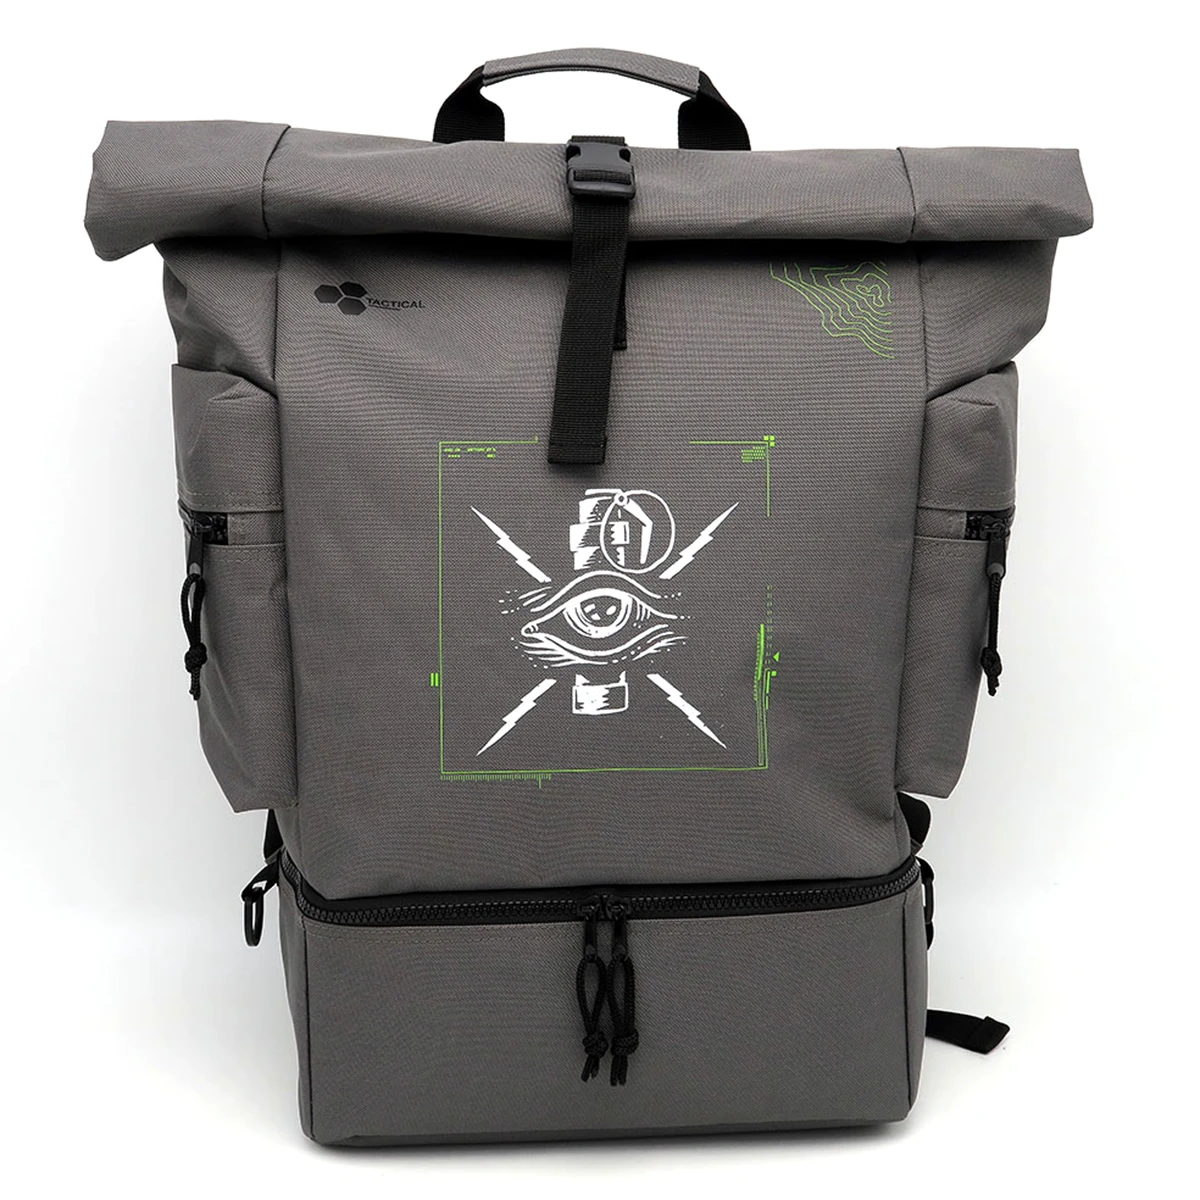 Call of Duty Rolltop Backpack "Blind" Grey